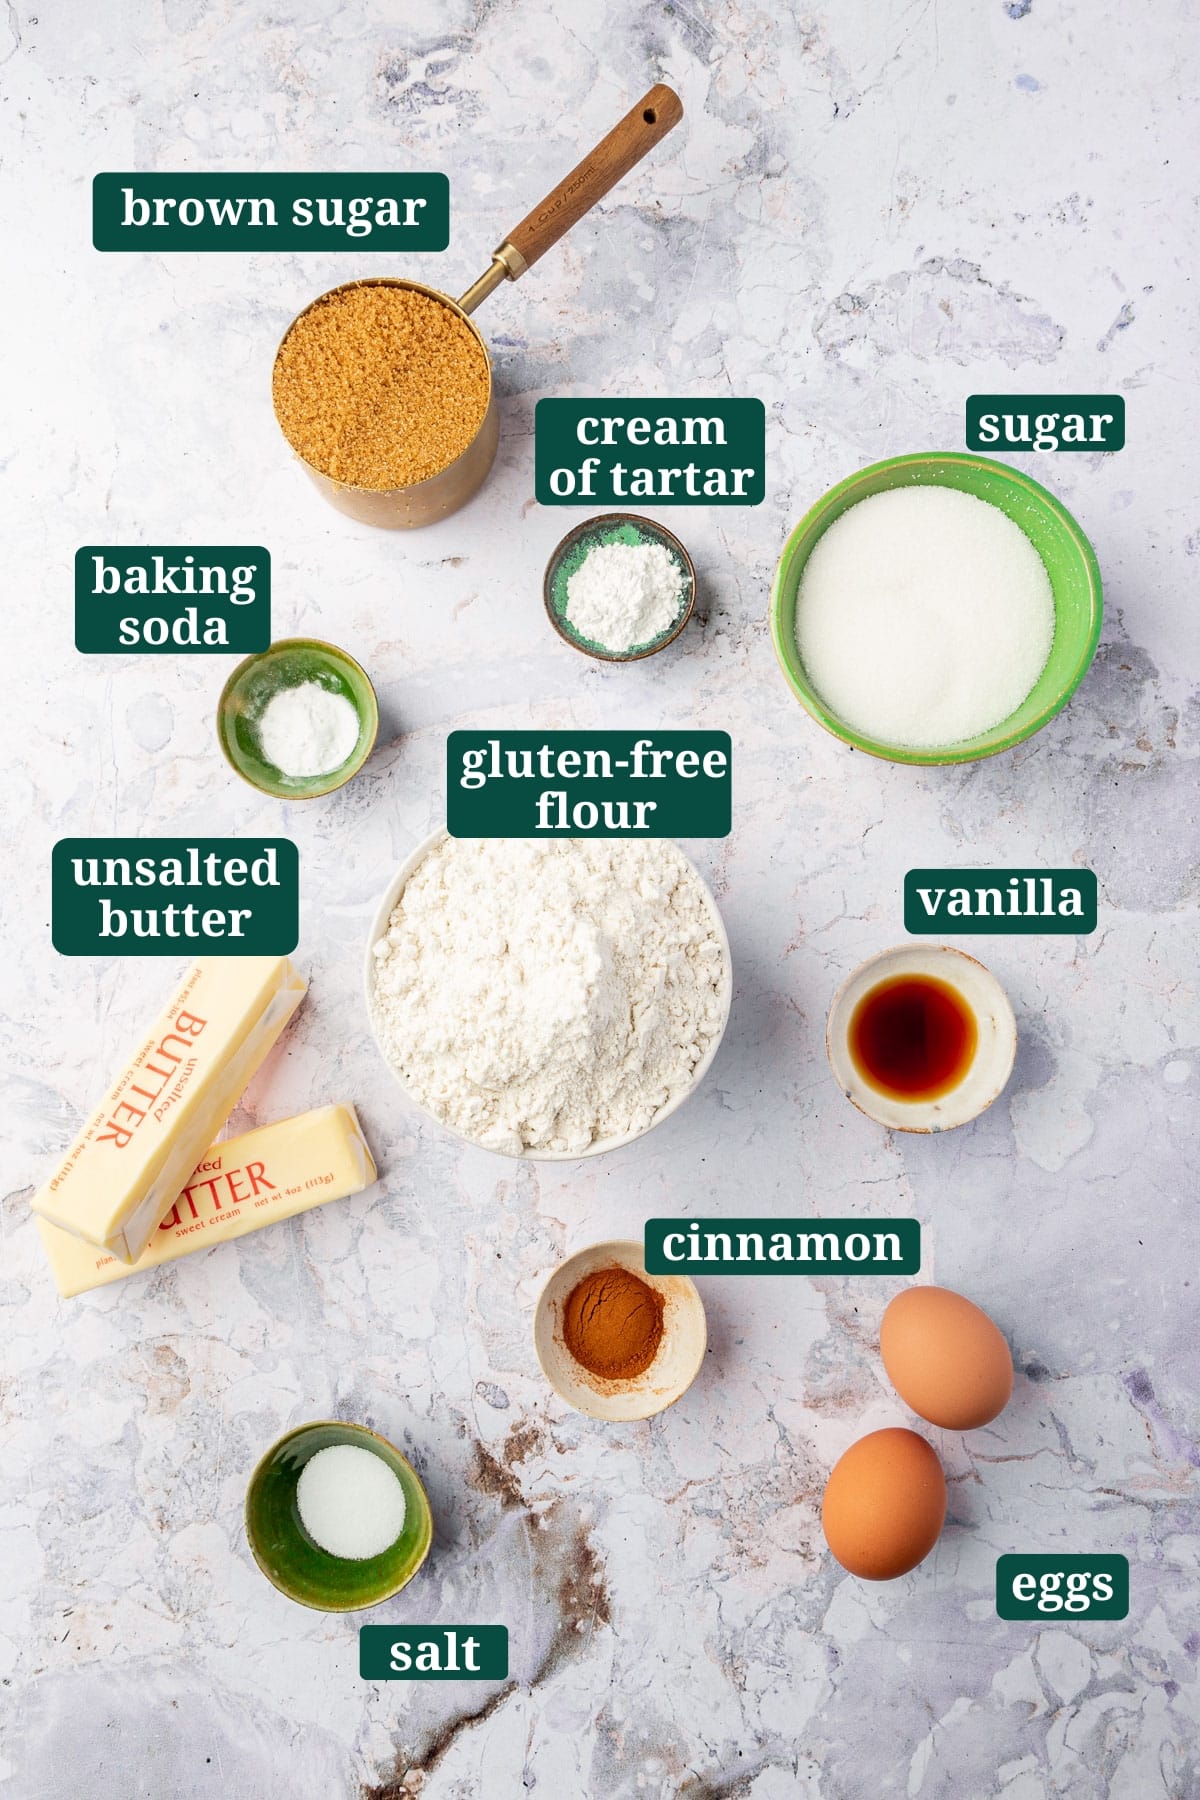 Ingredients in small bowls to make gluten-free snickerdoodles, including brown sugar, granulated sugar, gluten-free flour blend, cream of tartar, butter, eggs, vanilla, cinnamon, baking soda, and salt with text overlays over each ingredient.